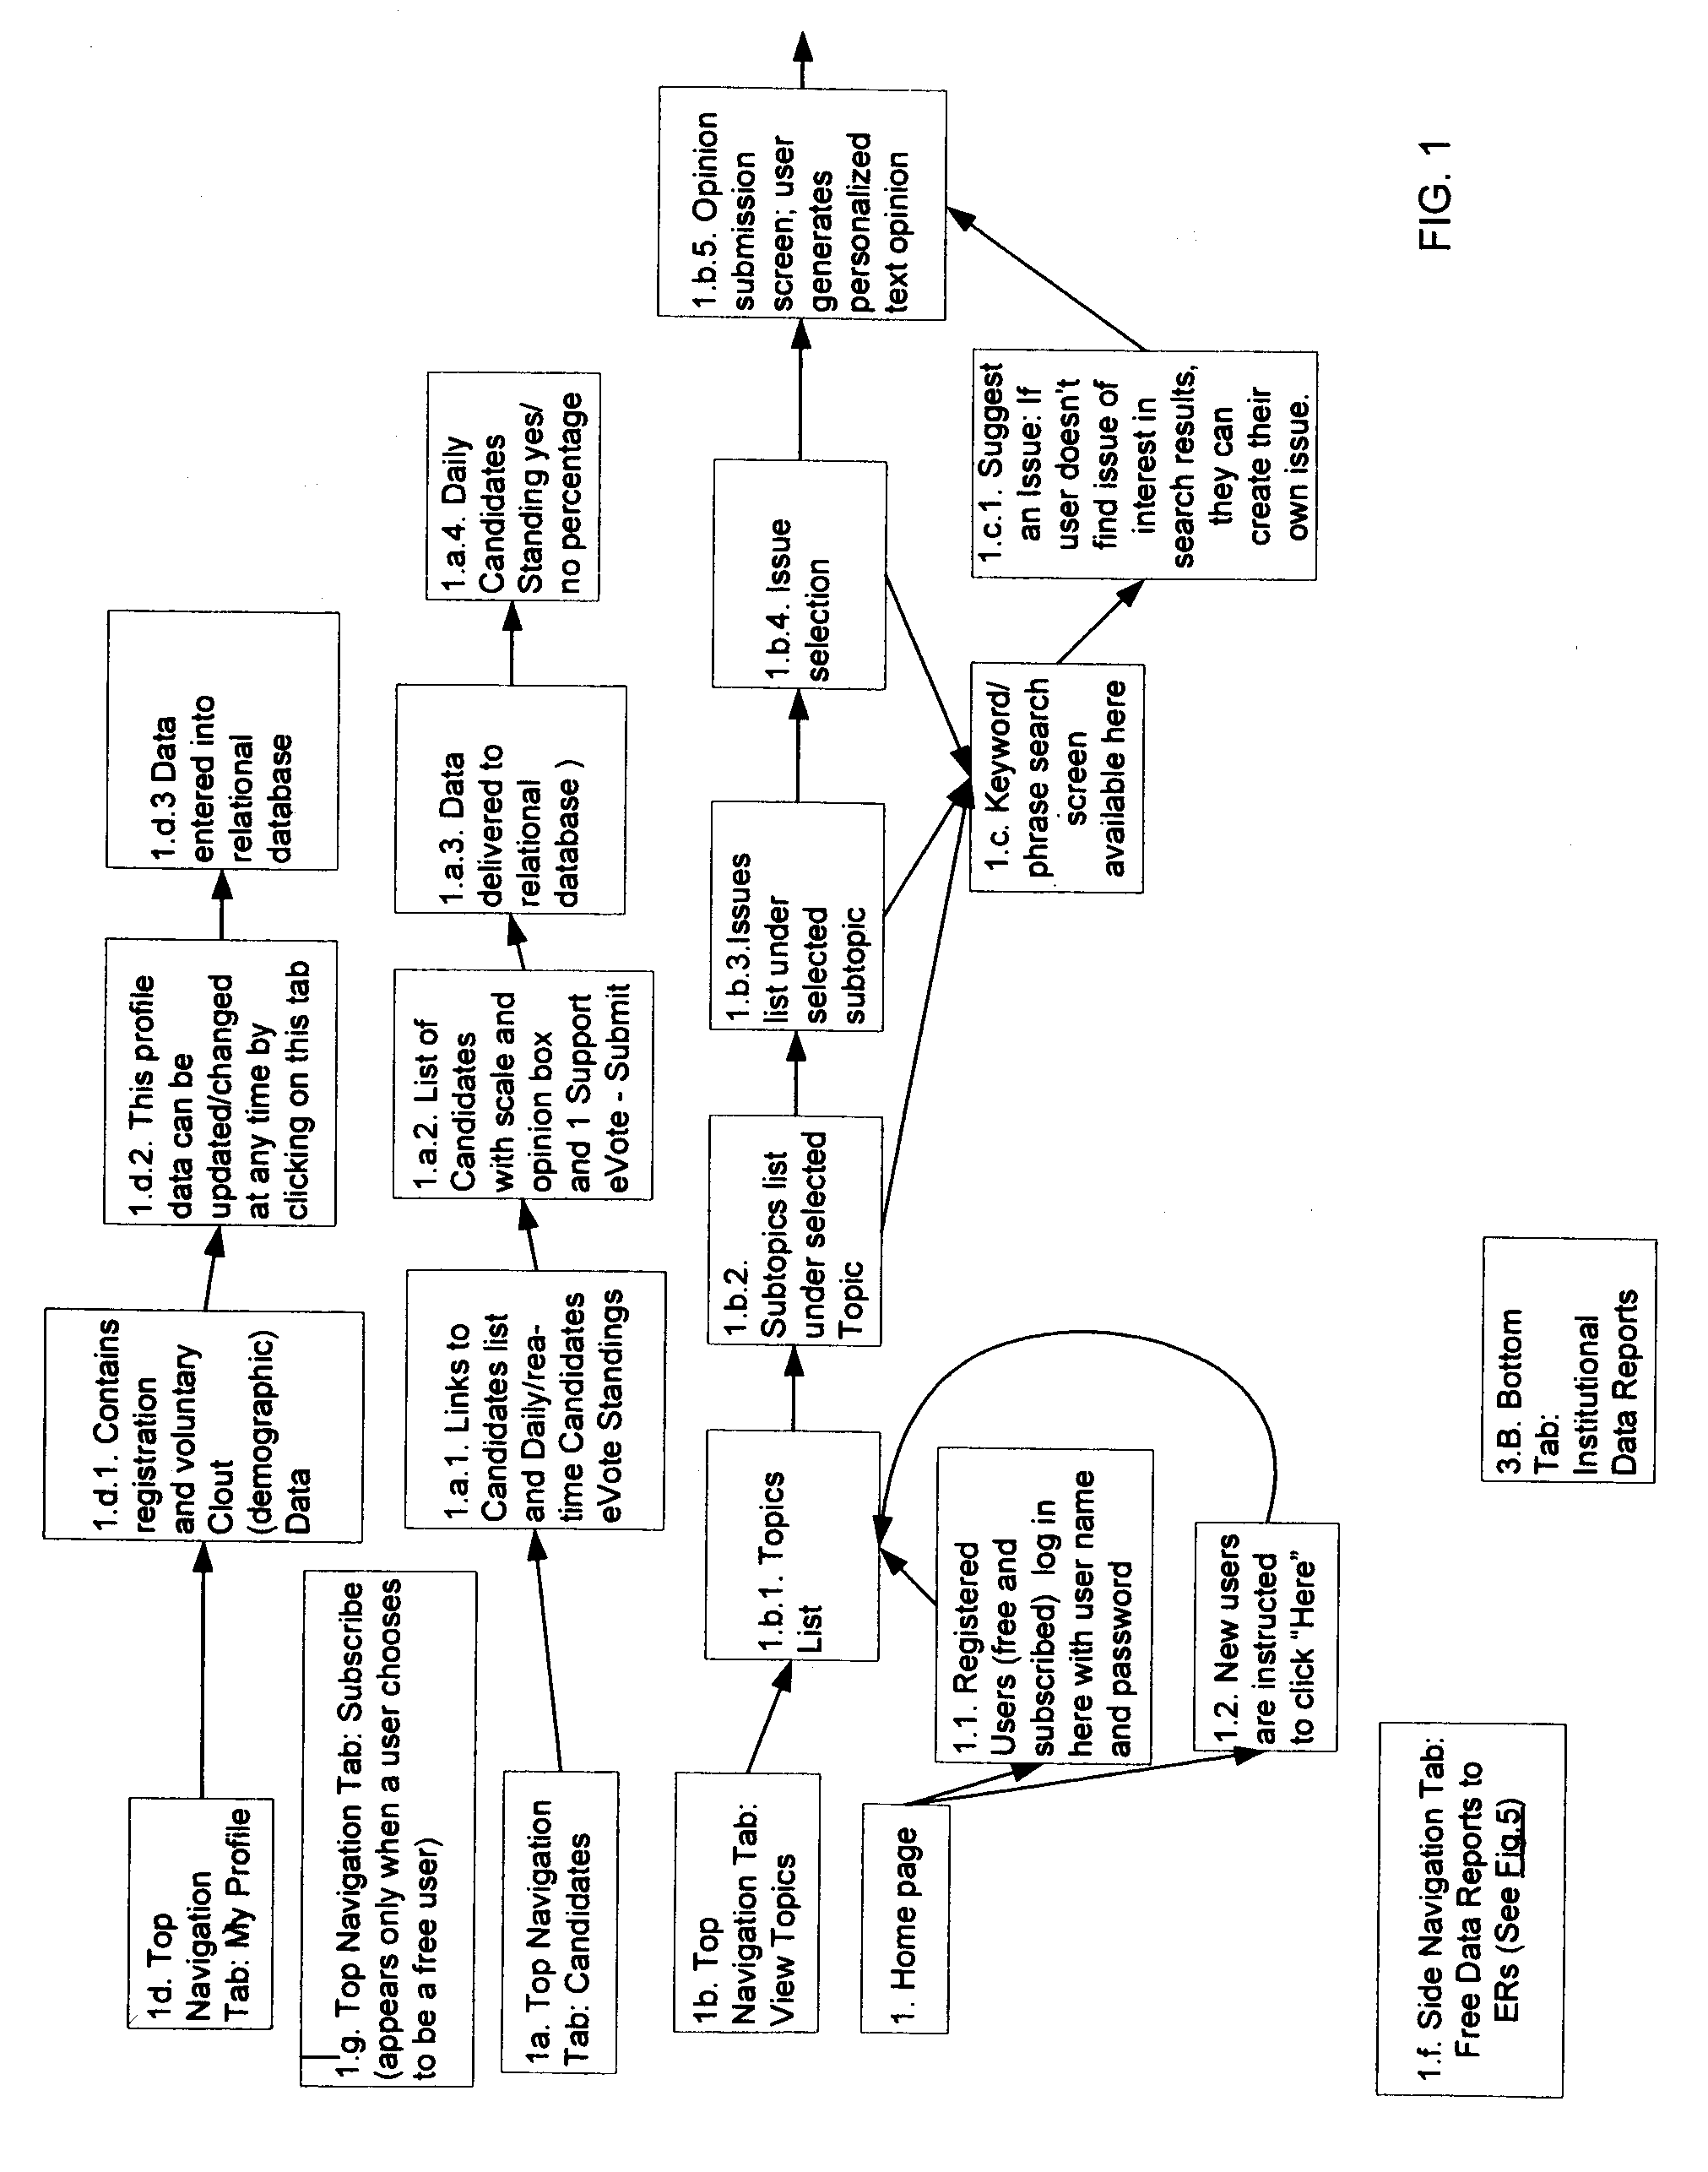 Method for compiling, trend-tracking, transmitting and reporting opinion data